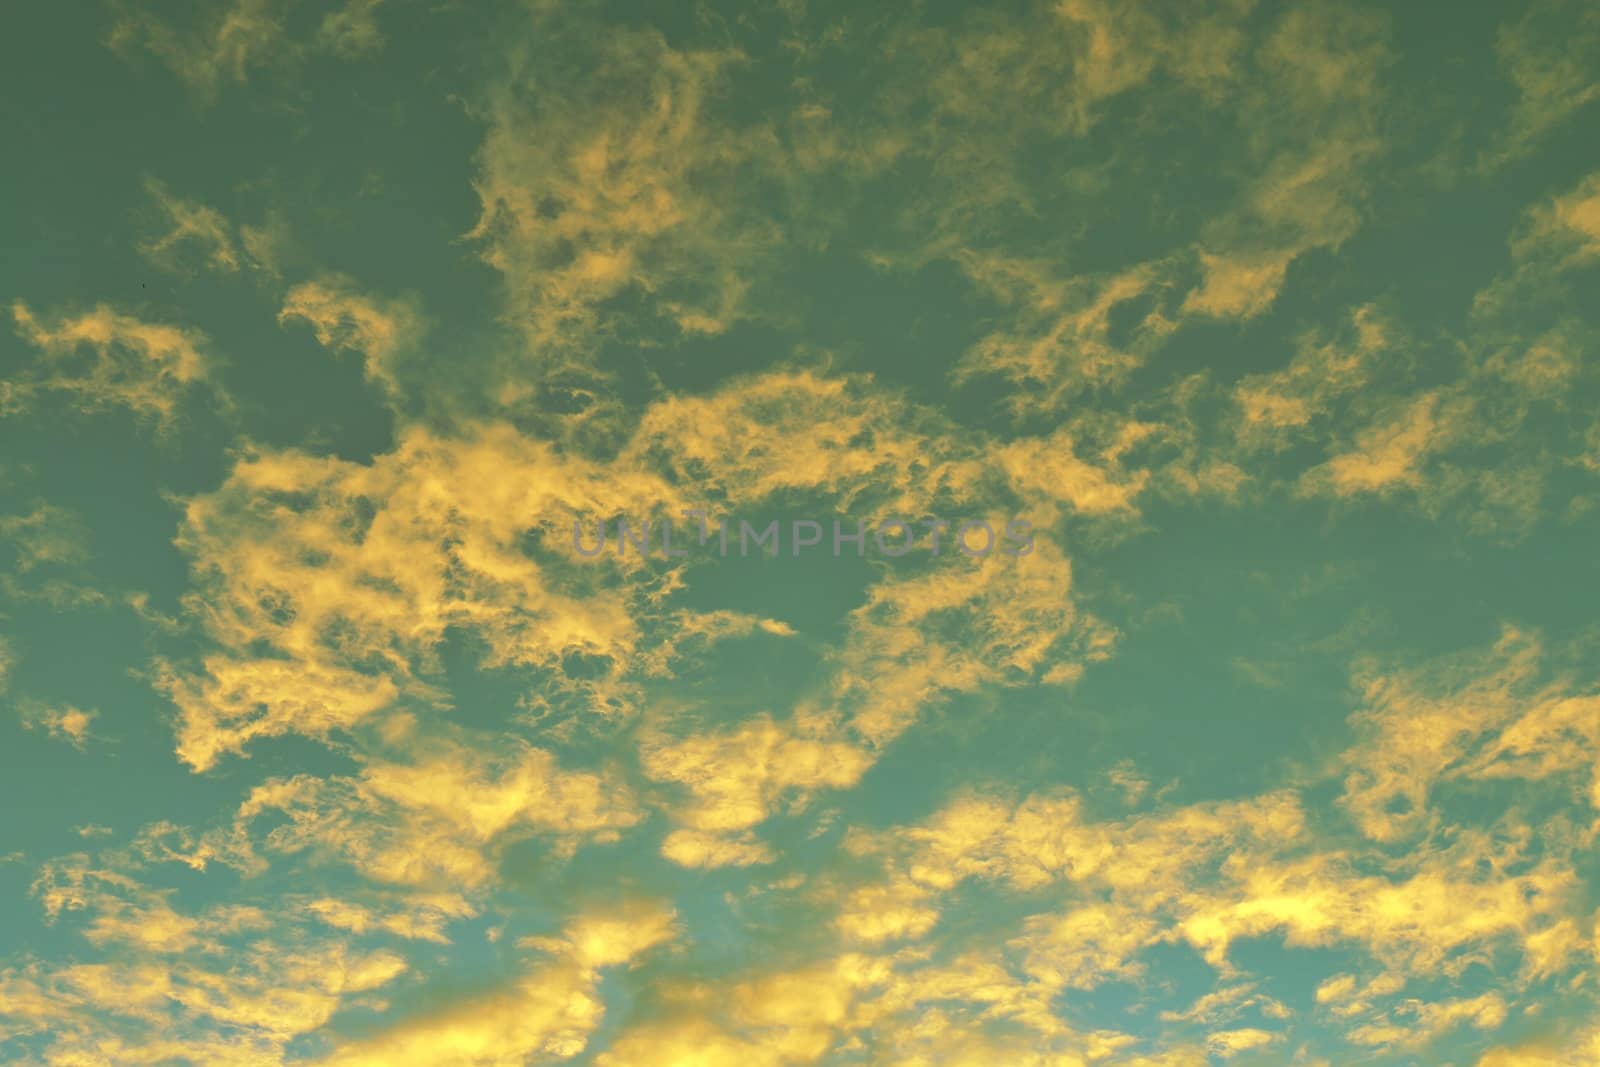 Global warming, twilight sky evening time, sunshine yellow gold on cloud blue sky background by cgdeaw